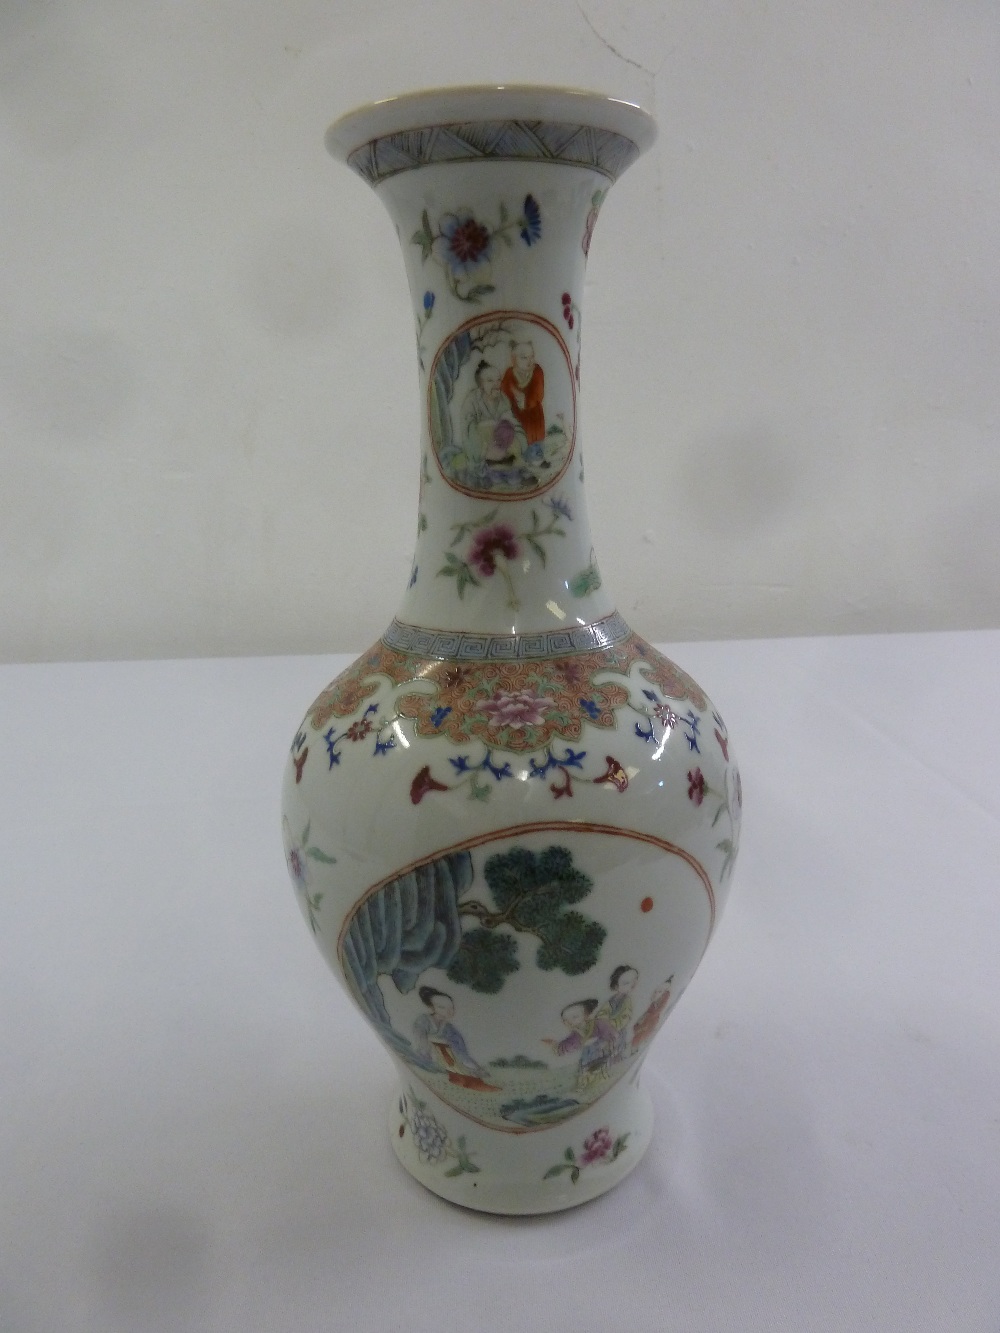 A Chinese 18th century baluster form vase decorated with figures and vegetation